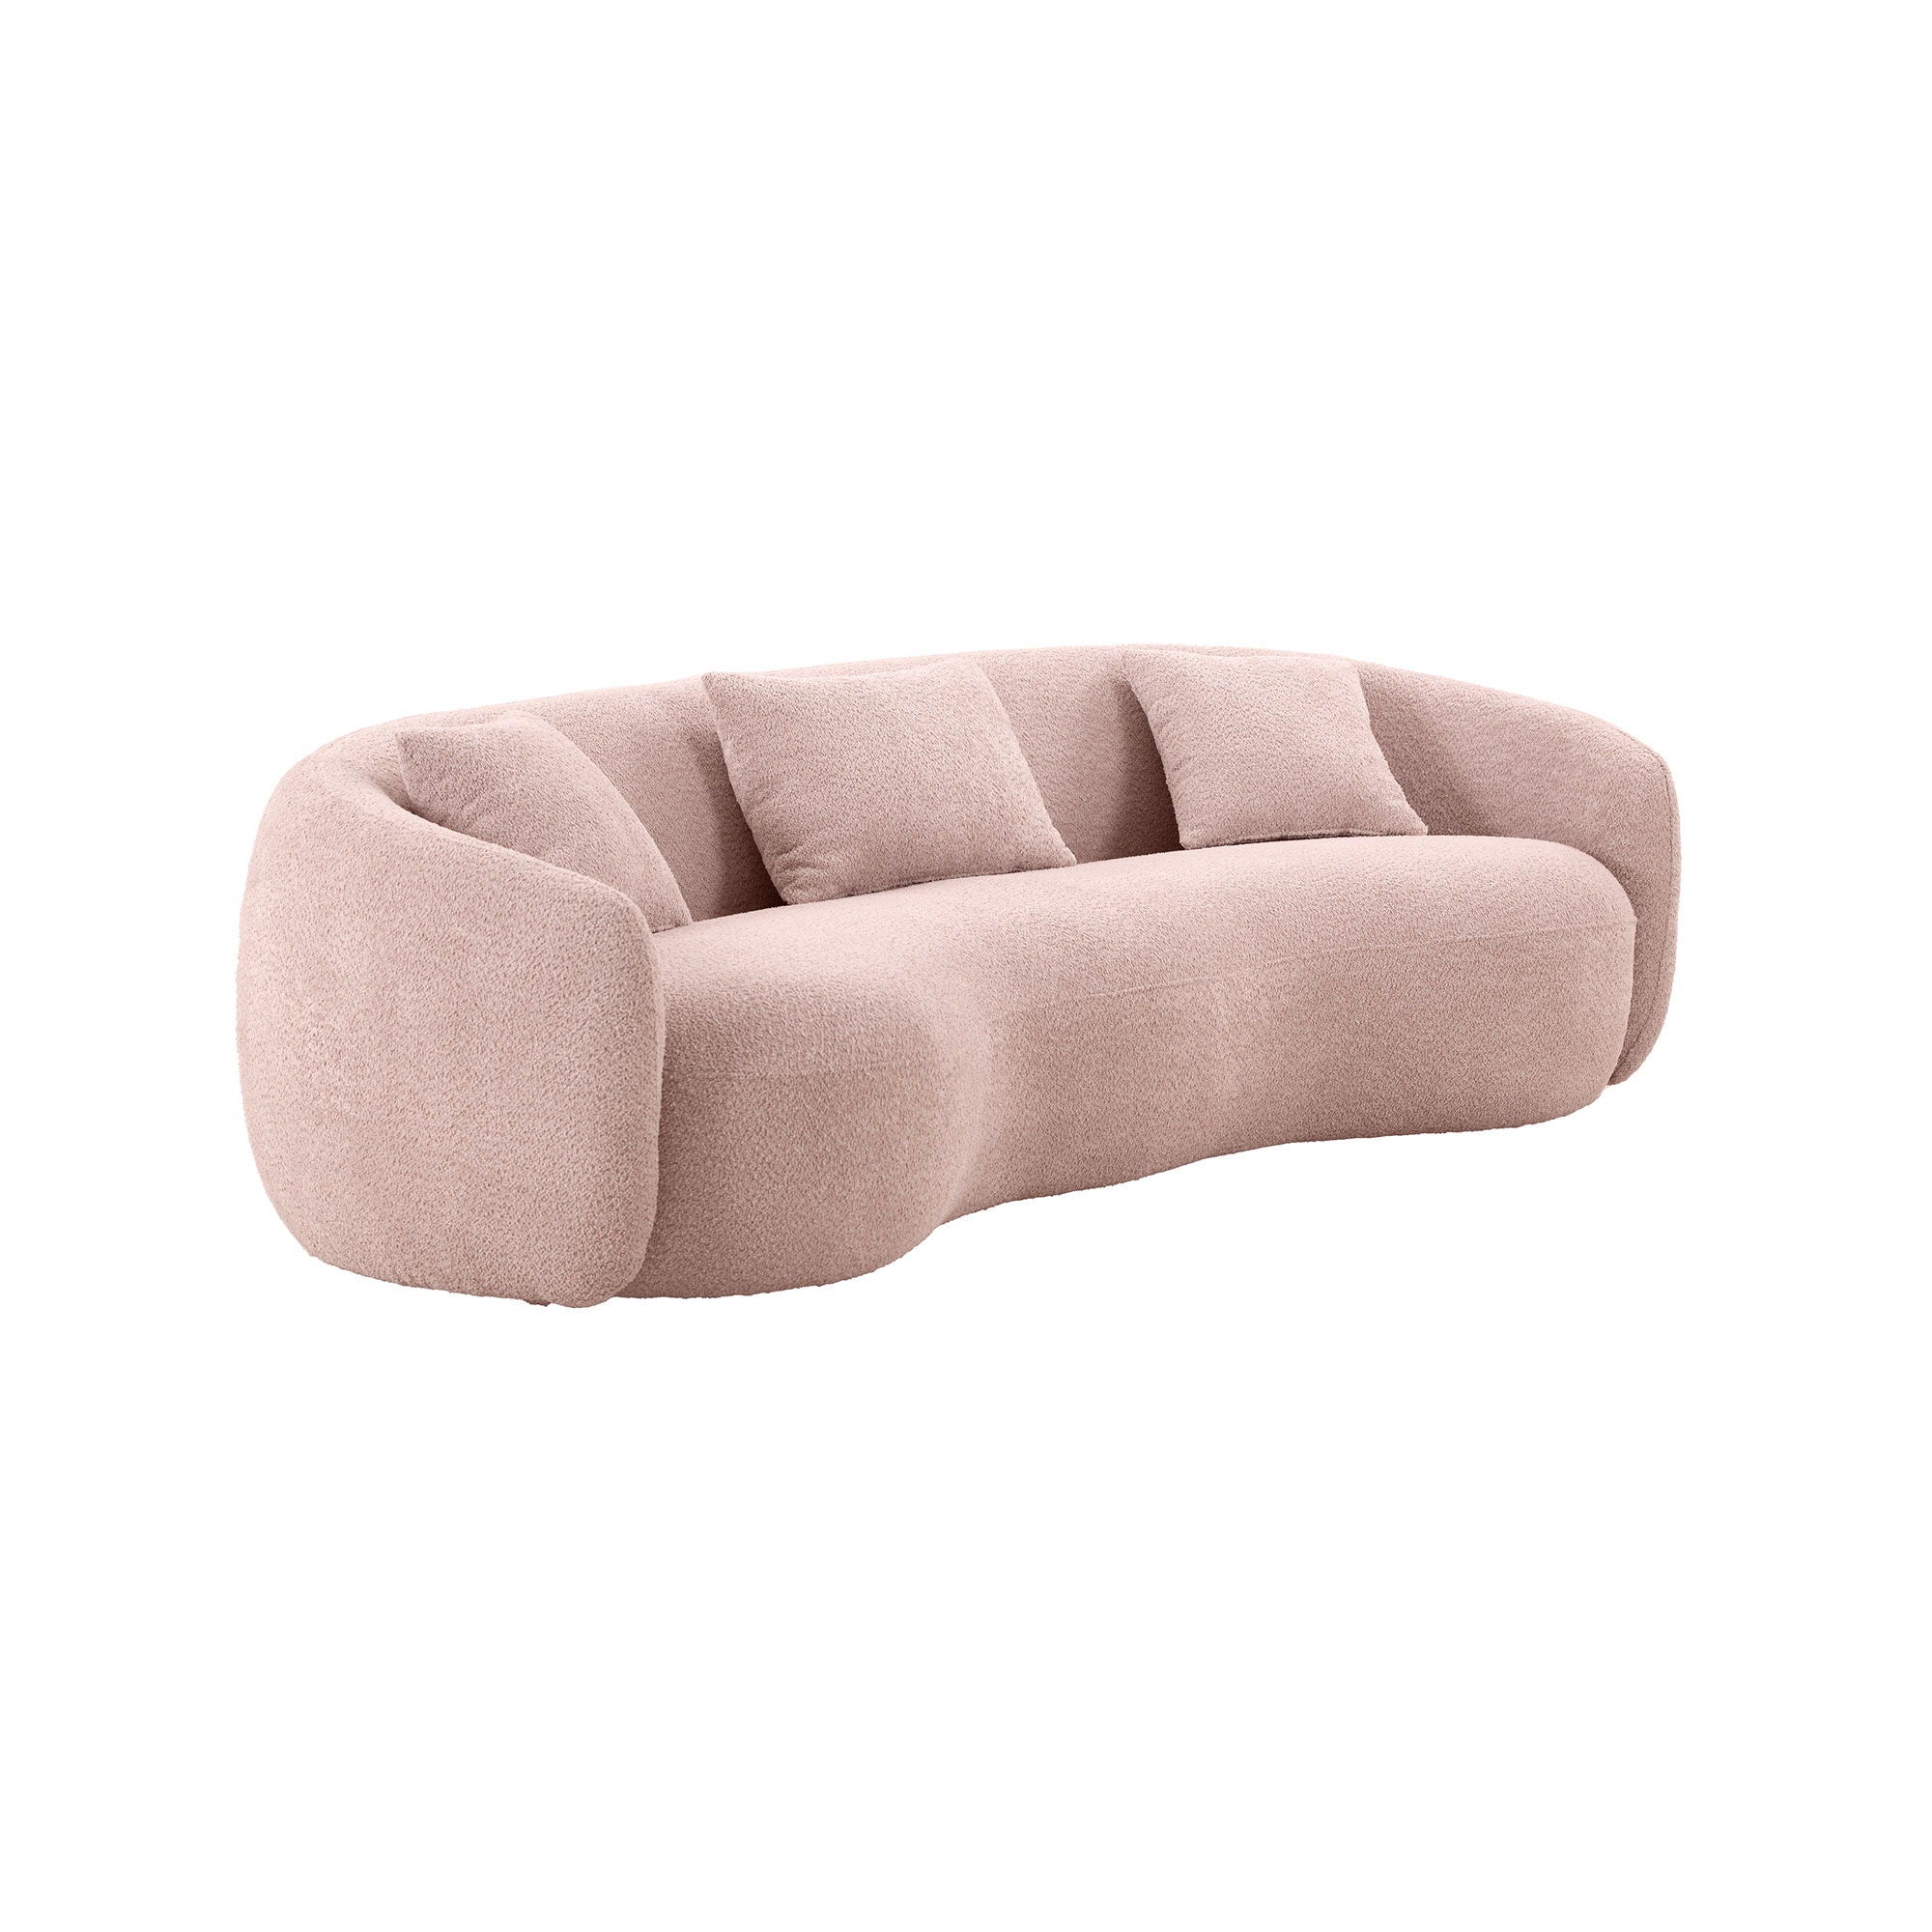 93.6'' Mid-Century Modern Curved Living Room Sofa, 4-Seat Boucle Fabric Couch For Bedroom, Office, Apartment, Pink